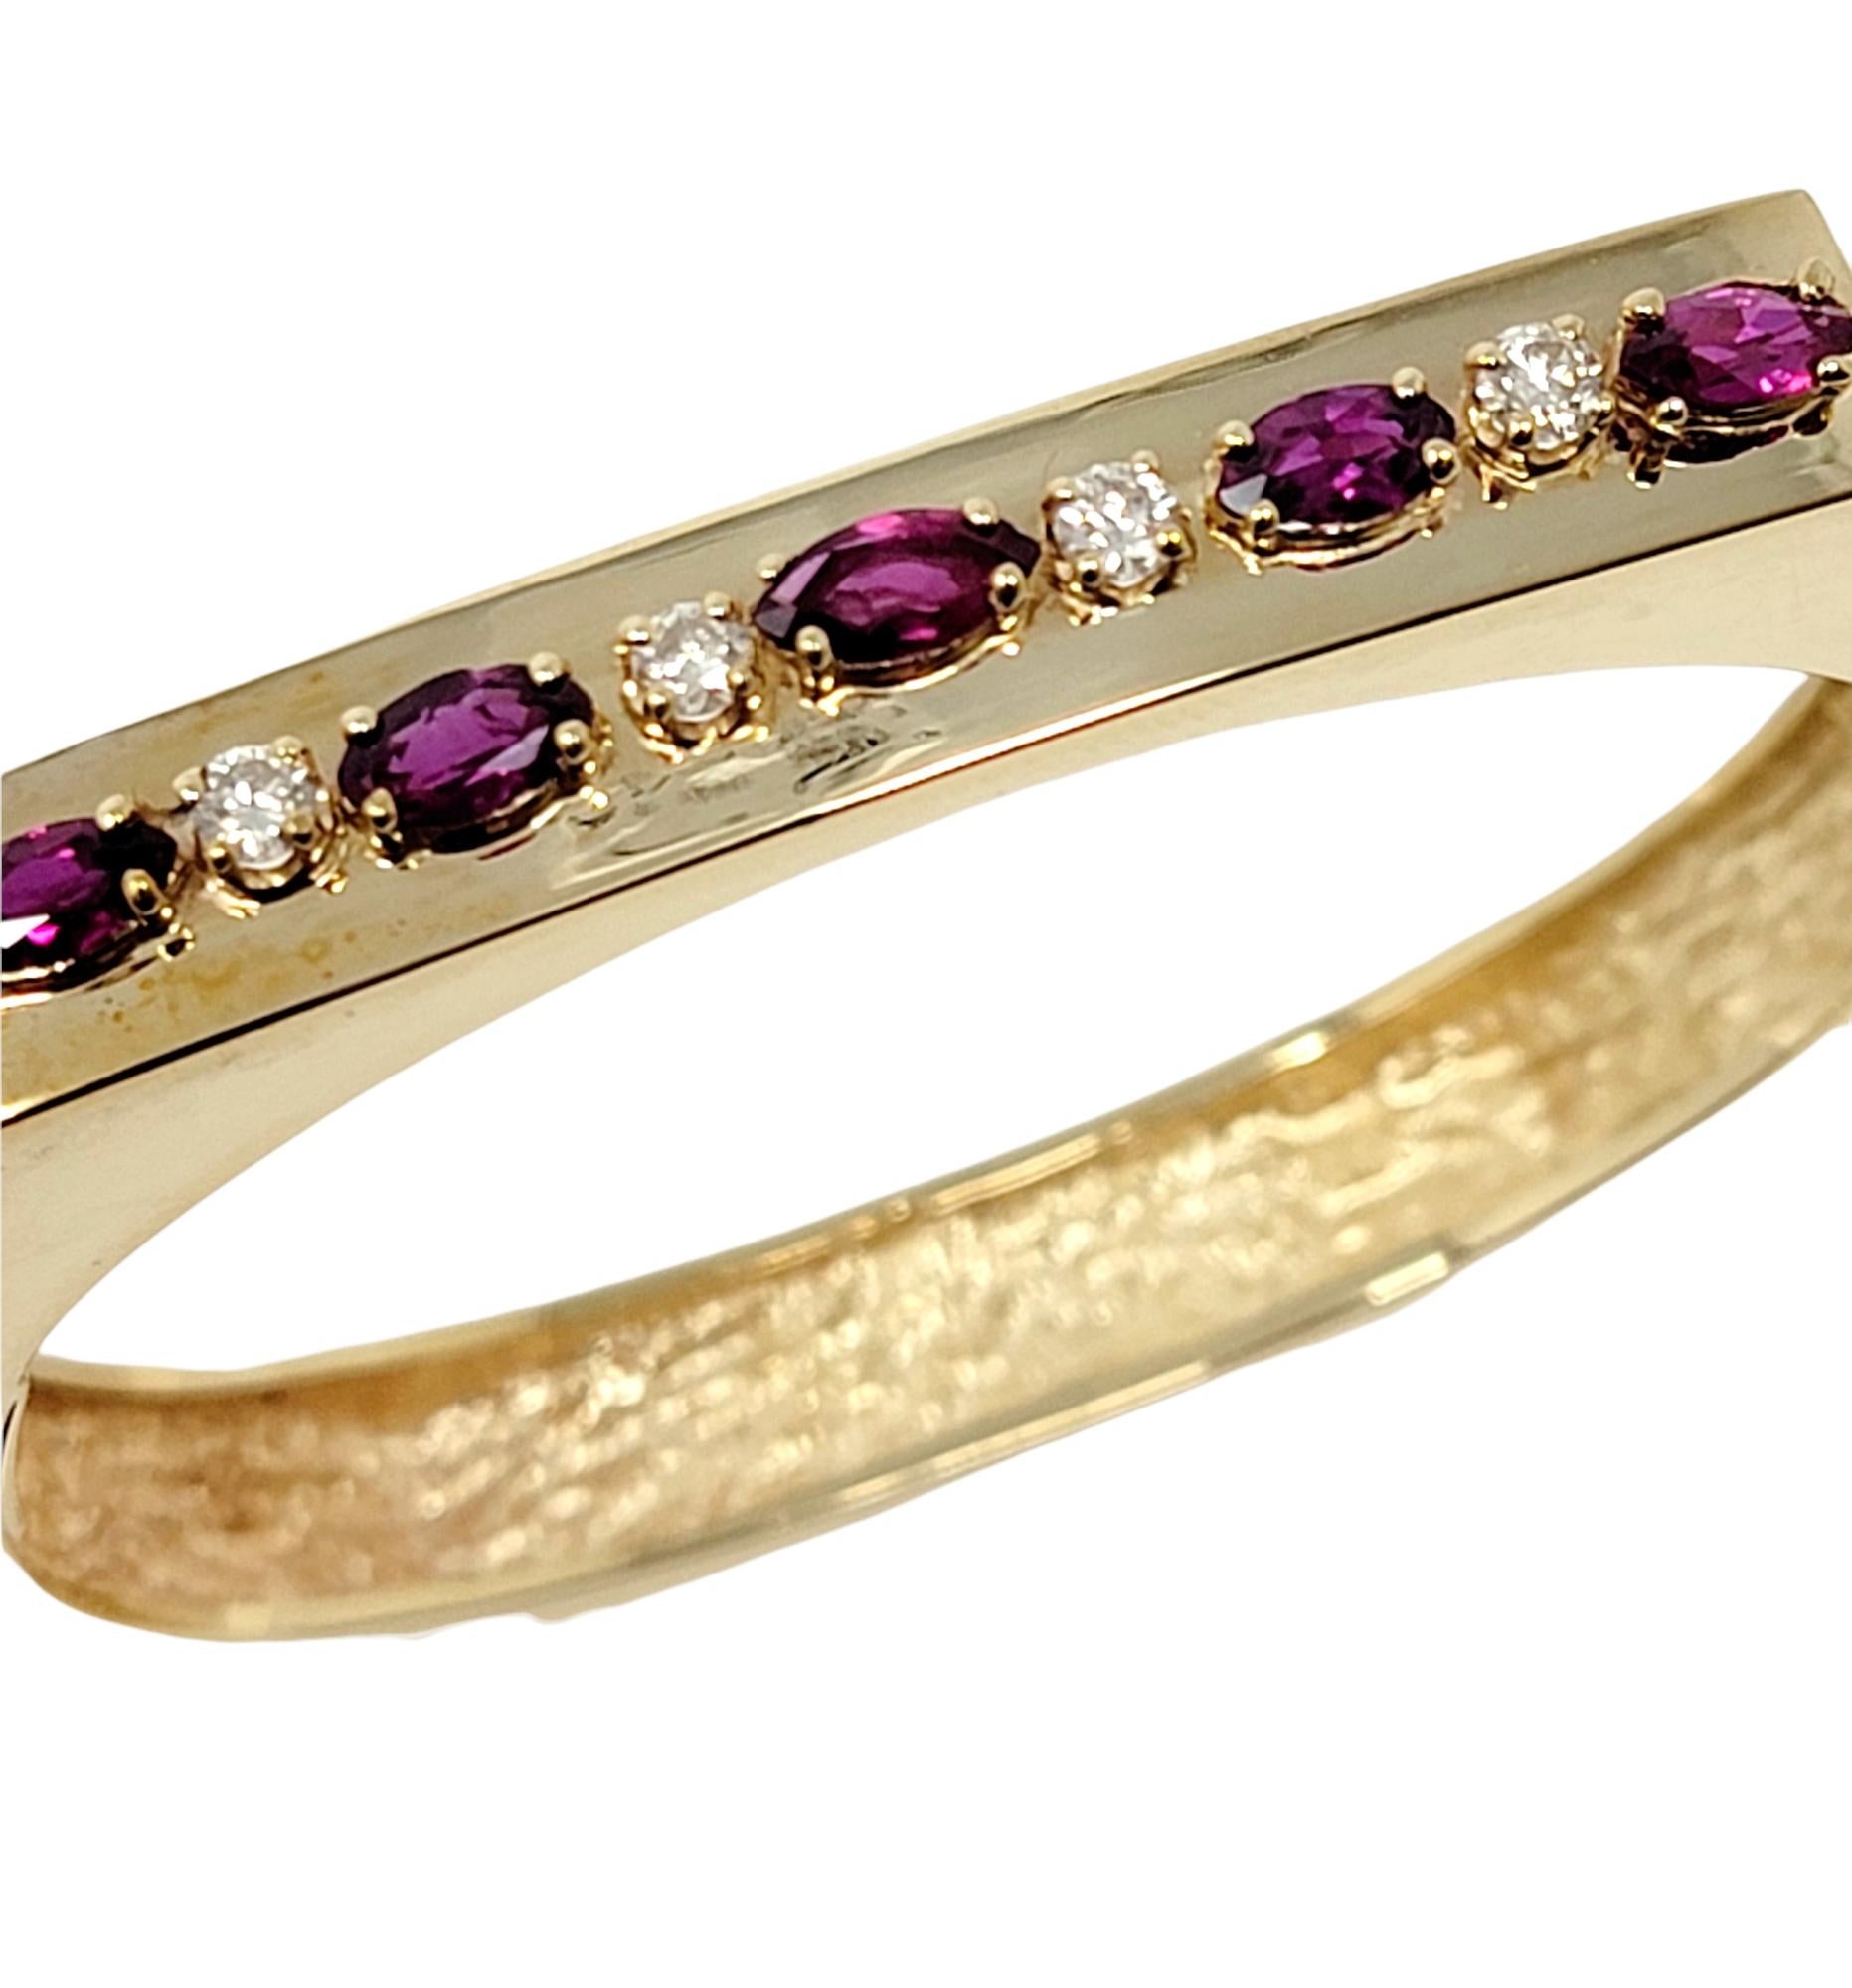 Elegant high polished yellow gold bangle bracelet with sparkling garnet and diamond detailing. The unique geometric design of the bangle gives the piece some added interest, while the colorful rhodolite garnets and shimmering natural diamonds